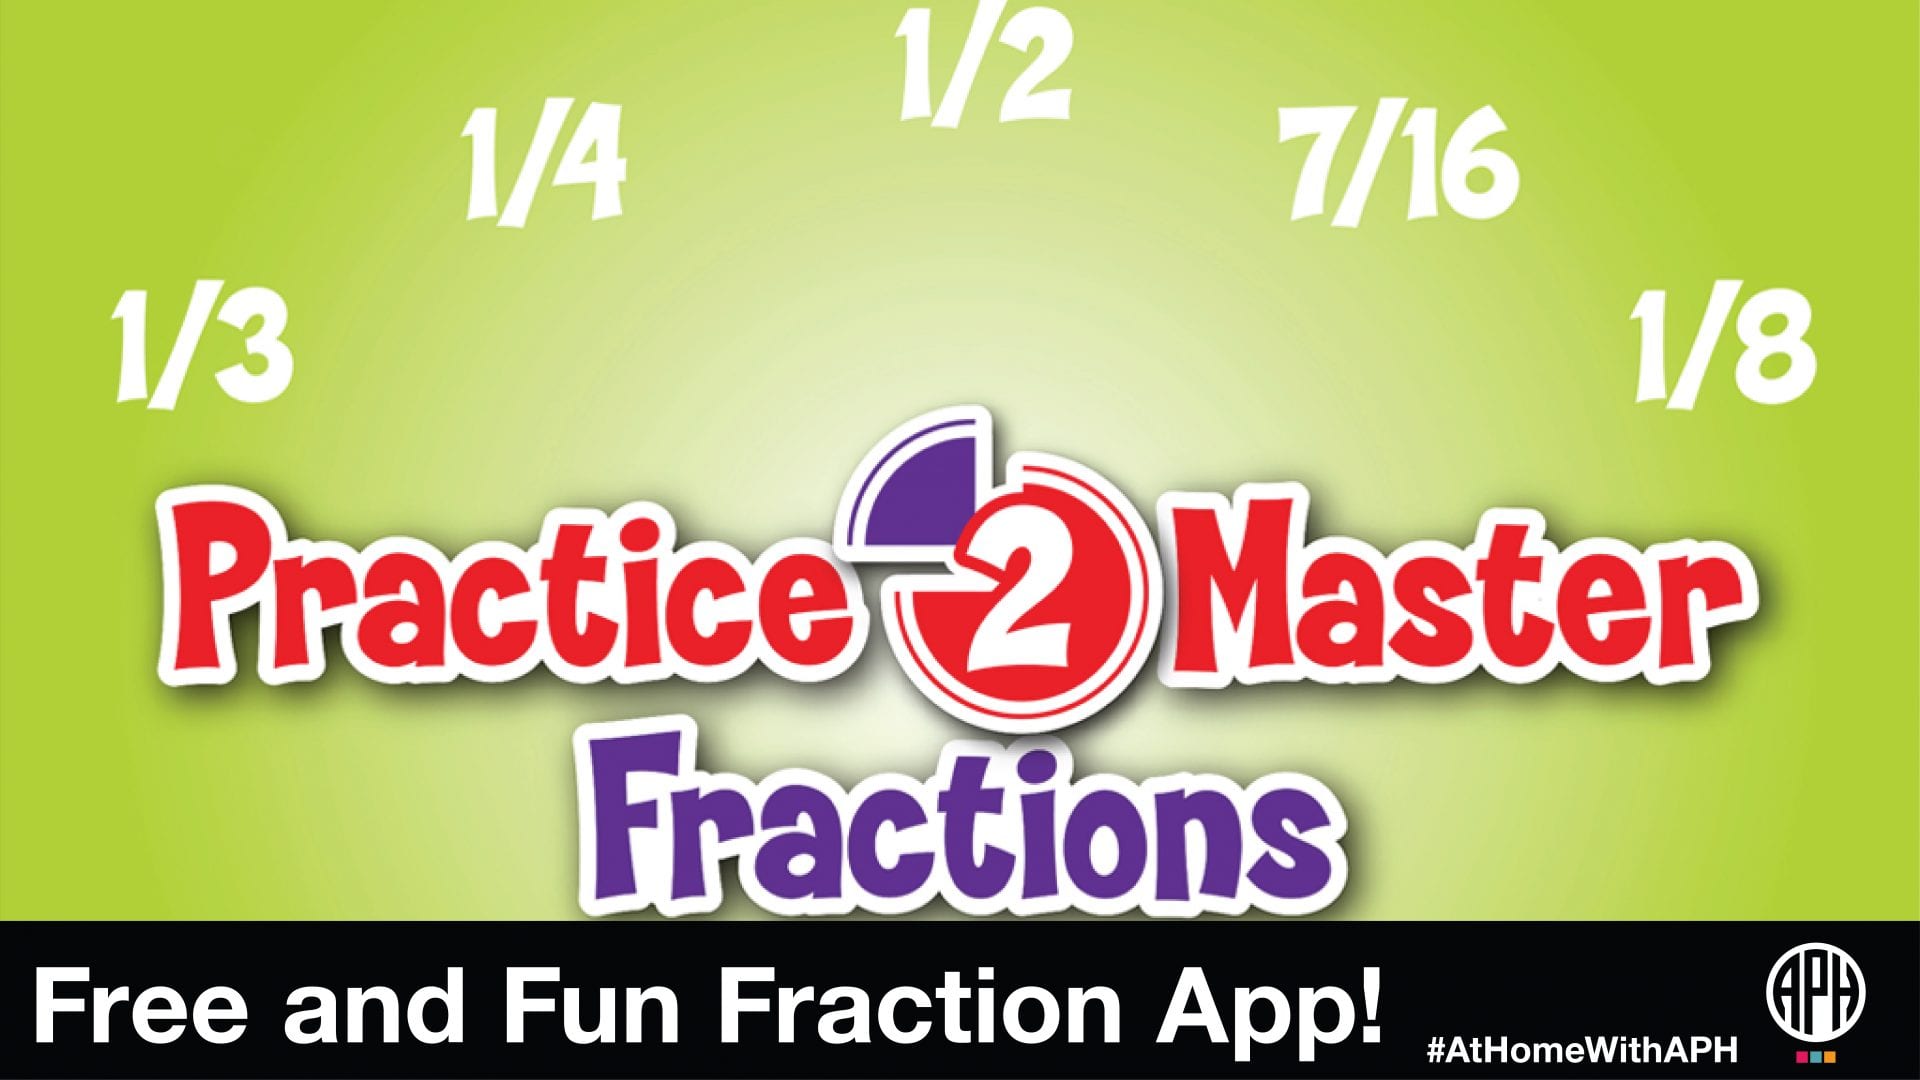 logo for Practice2Master Fractions. text reads "Free and Fun Fraction App! #AtHomeWithAPH"